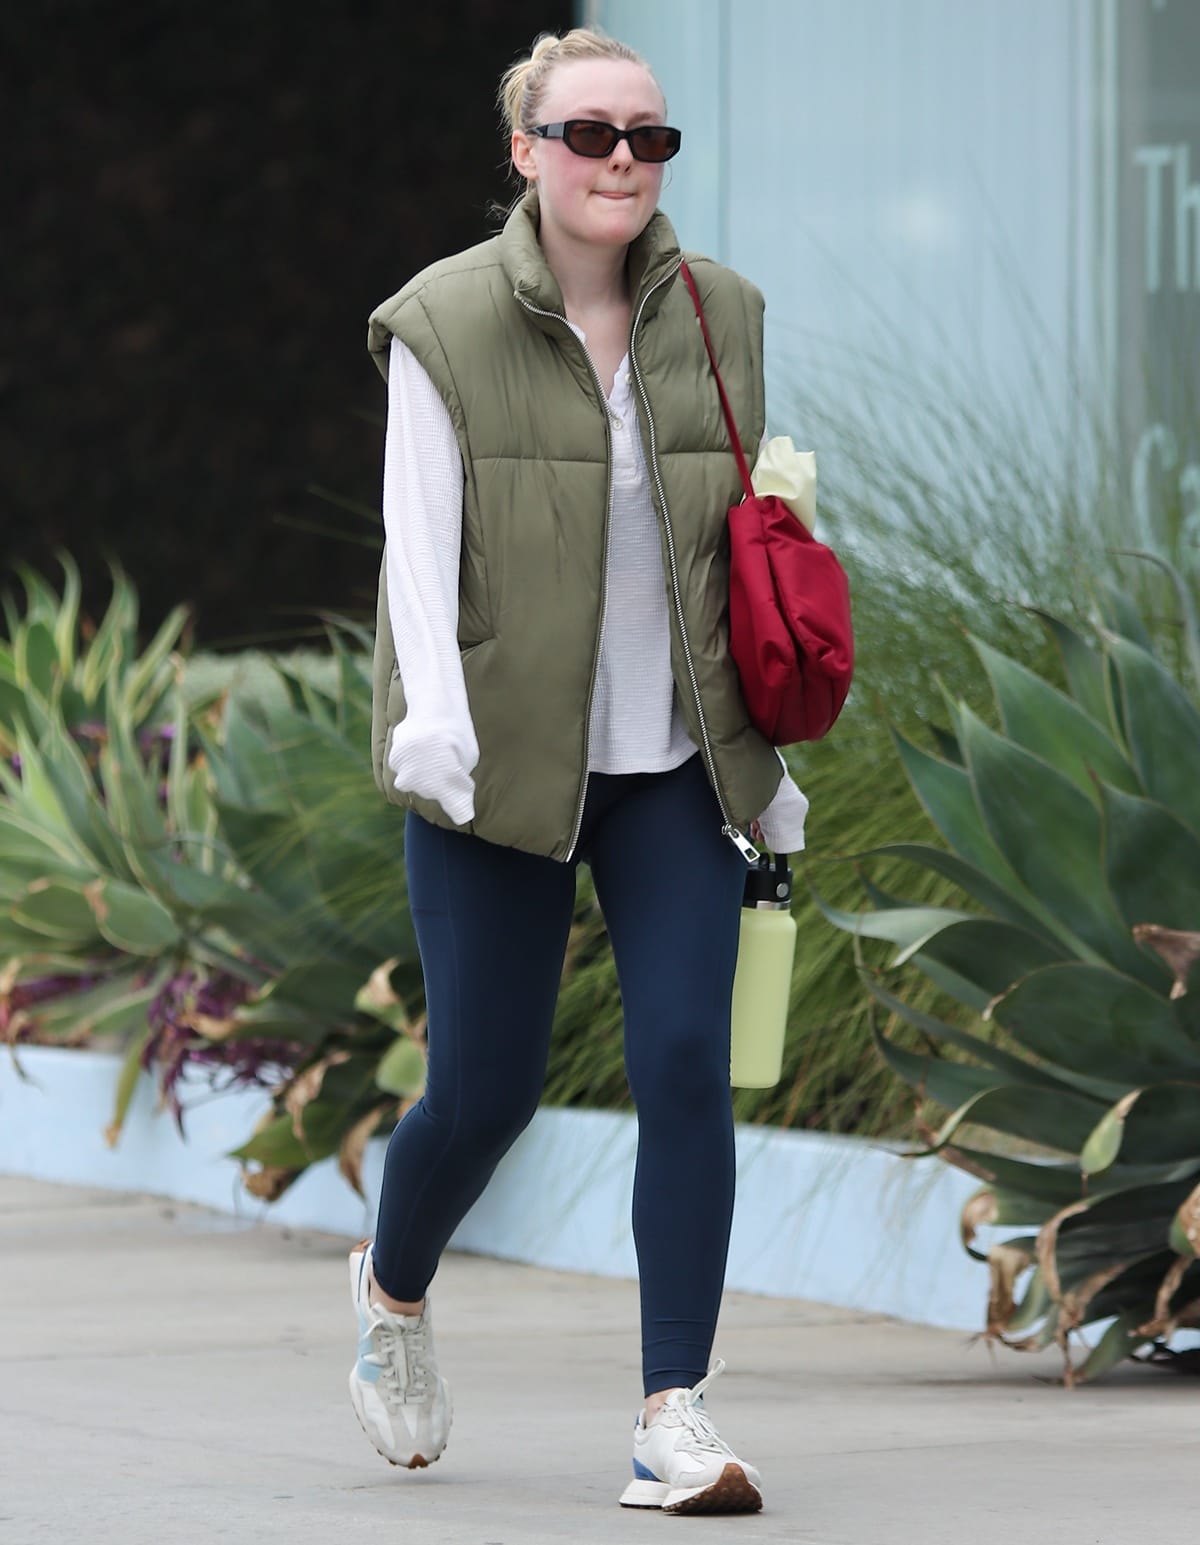 Dakota Fanning in Staud x New Balance 327 “Sea Salt Atlantic” sneakers paired with a khaki vest and navy leggings makes her way to the gym